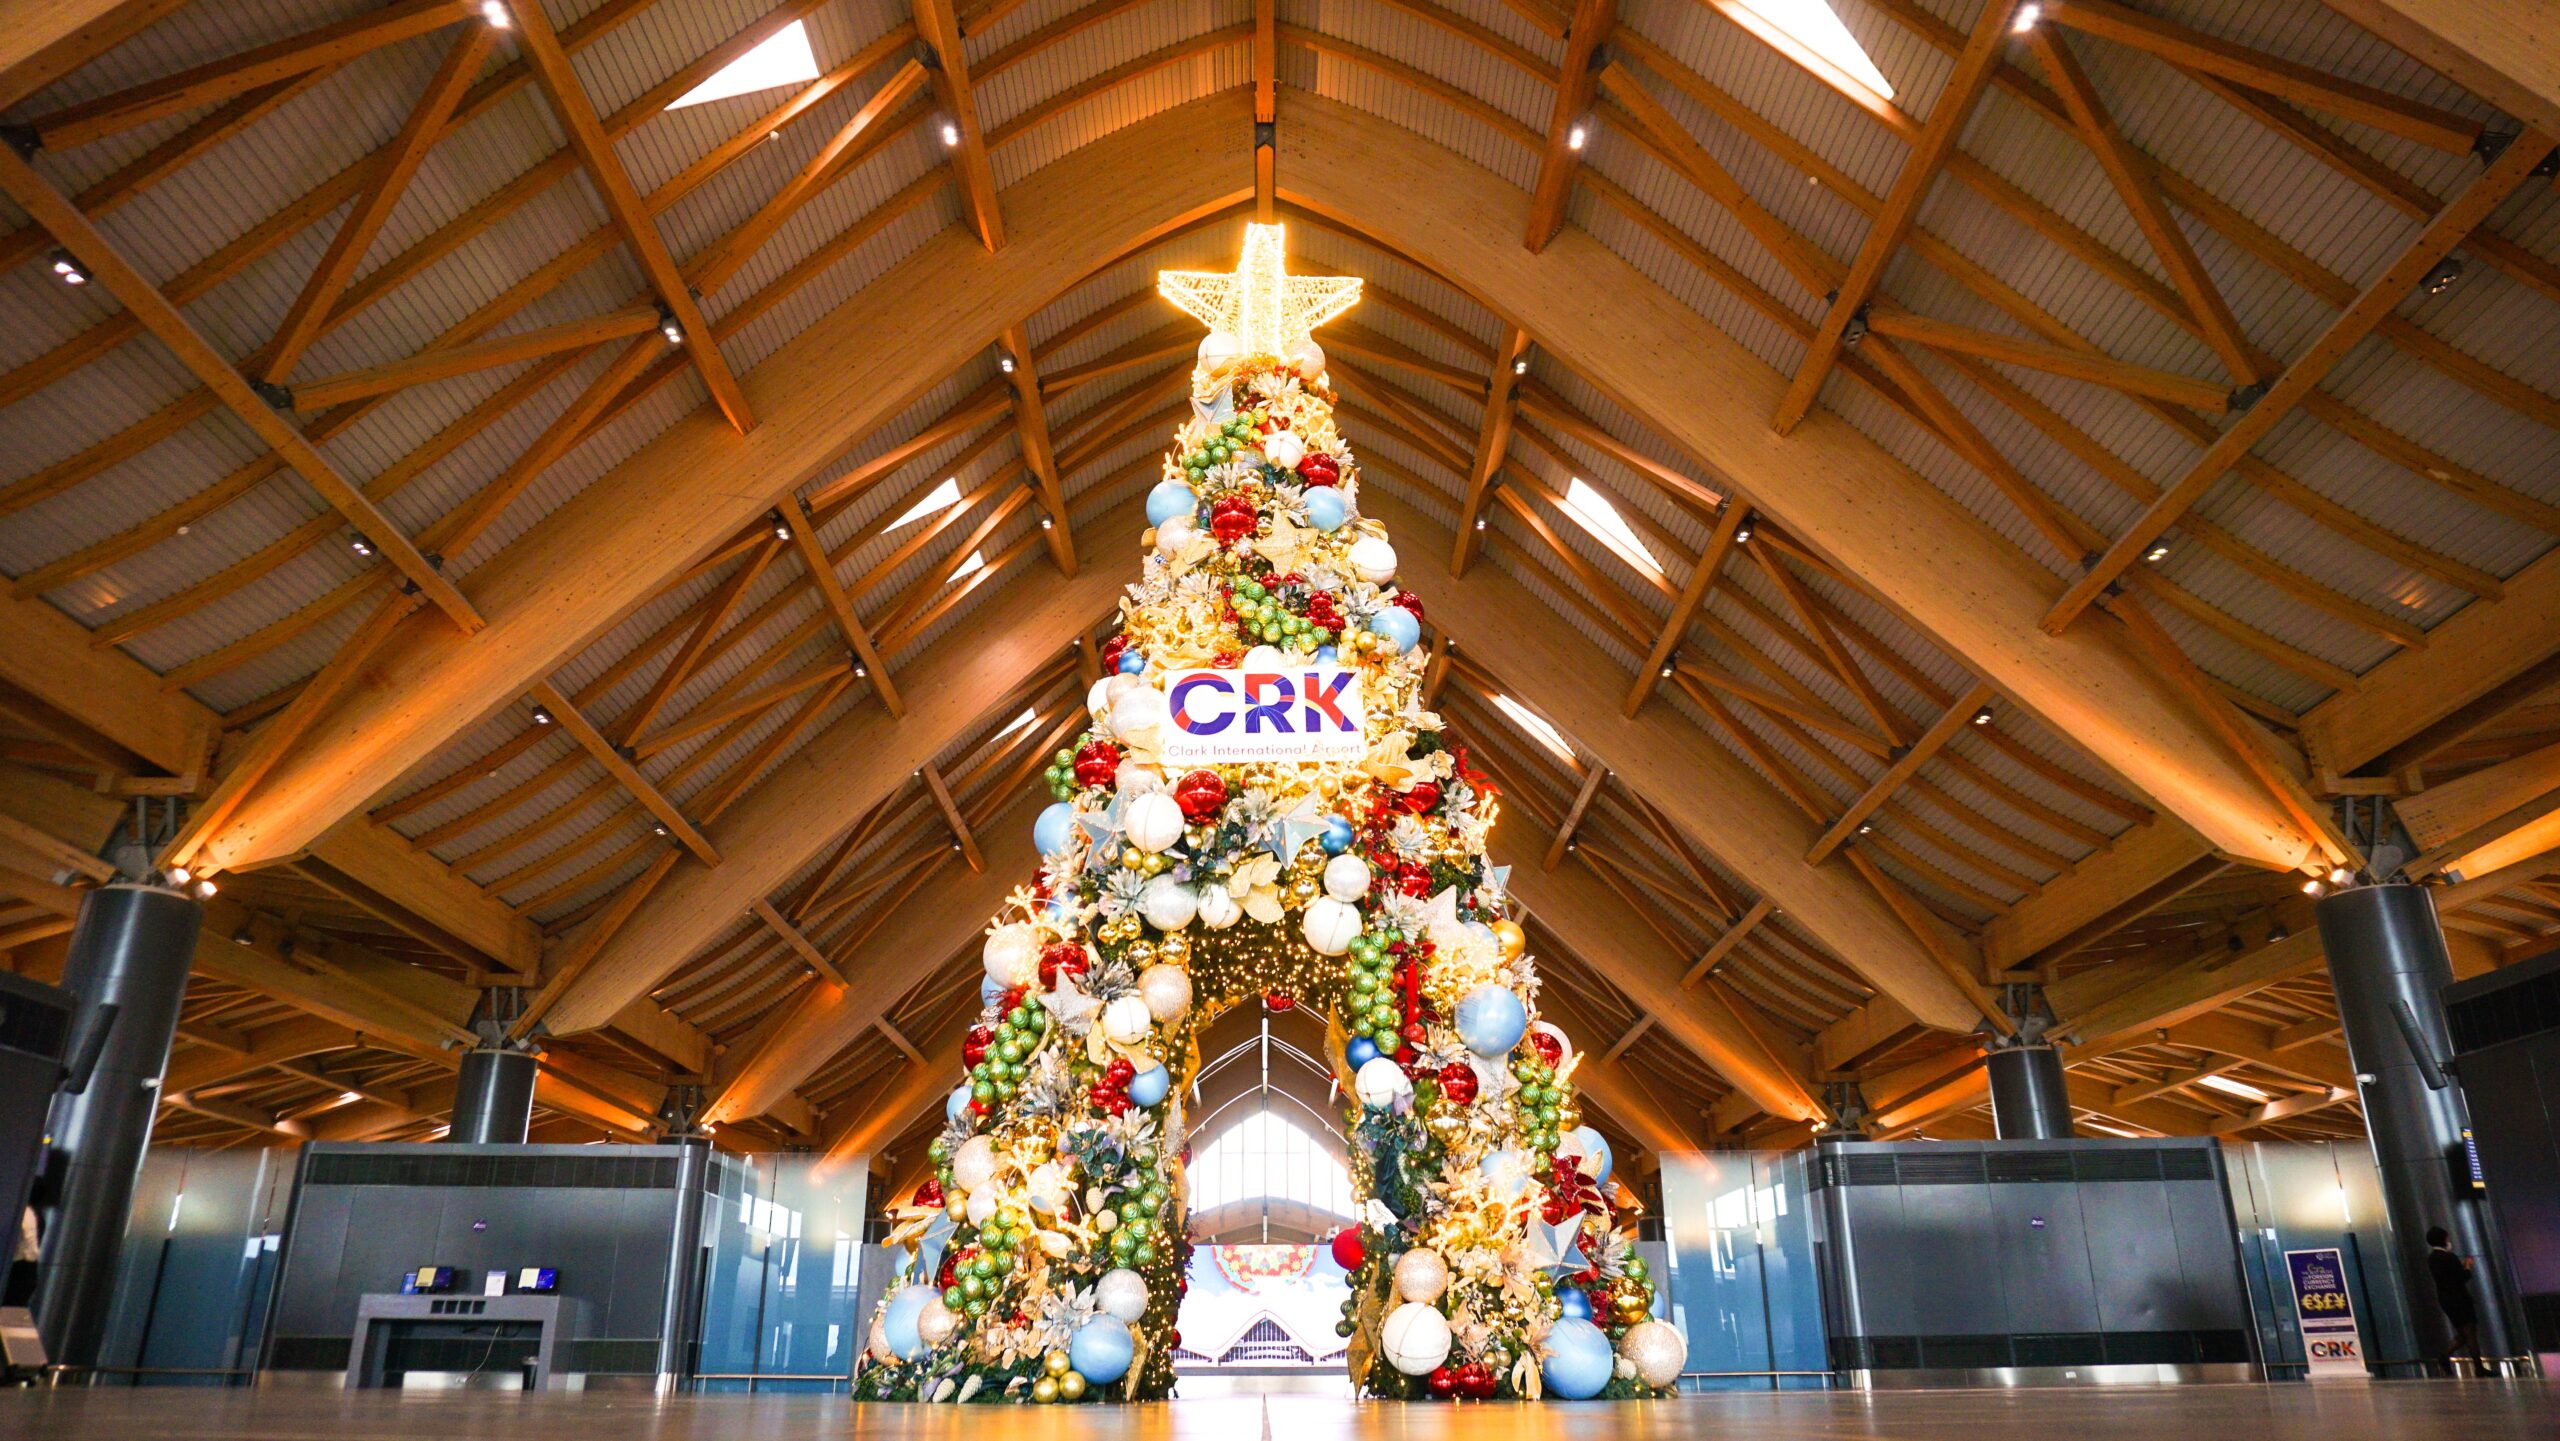 For CRK Visitors: ’12 Days of Christmas’ Giveaway Event from Dec. 13 to 24